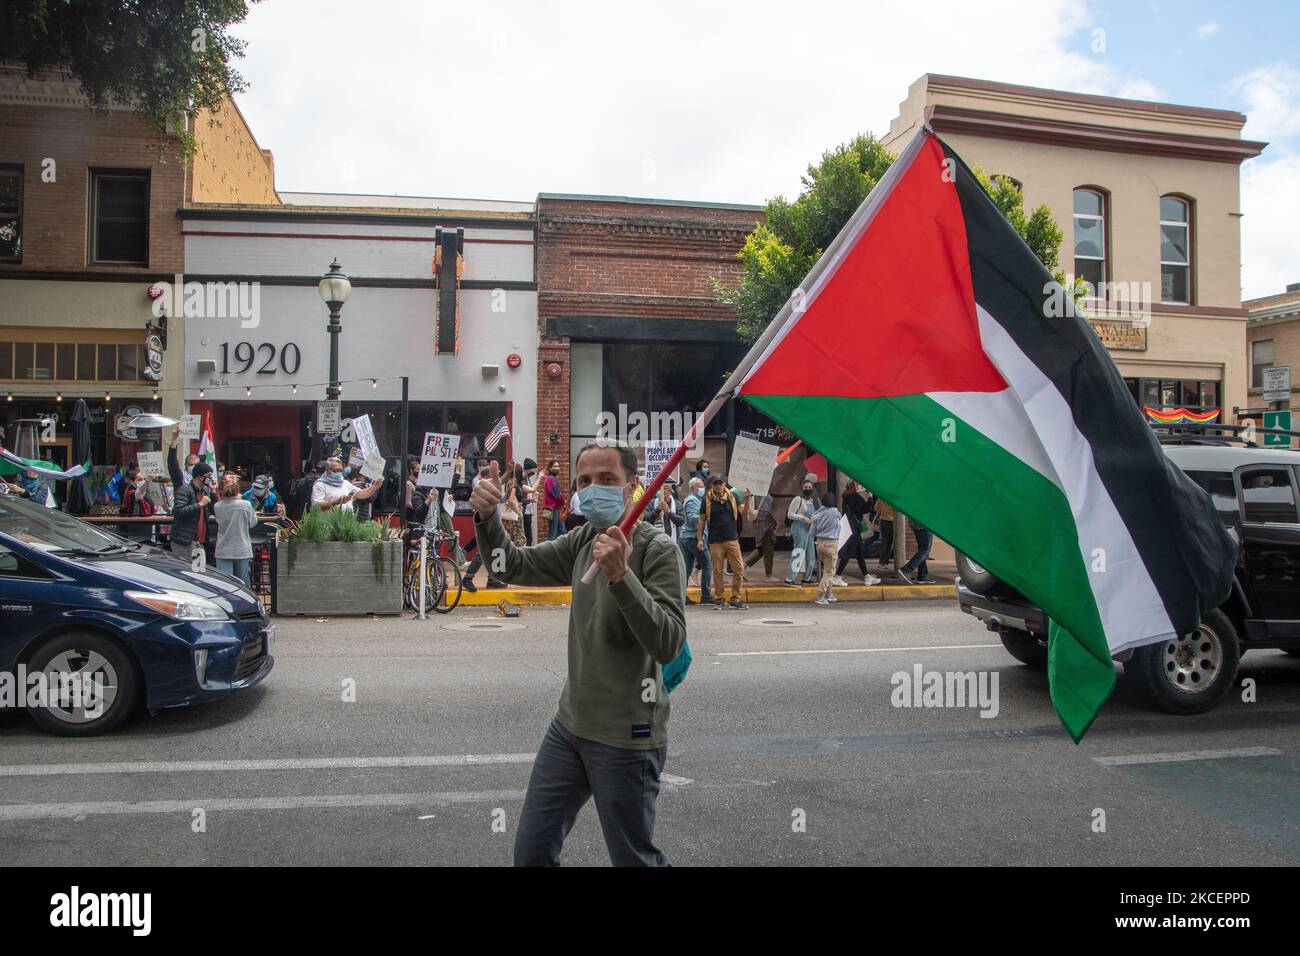 Residents of San Luis Obispo, California marched through the city calling for an end to Israeli apartheid and ethnic cleansing of Palestinians on May 16, 2021, a day after the 73rd anniversary of Nakba, or 'the catastrophe,' where in 1948, hundreds of Palestinian villages were destroyed, displacing 700,000 Palestinians from their homeland as Israel gained statehood. (Photo by Adam J. Dewey/NurPhoto) Stock Photo